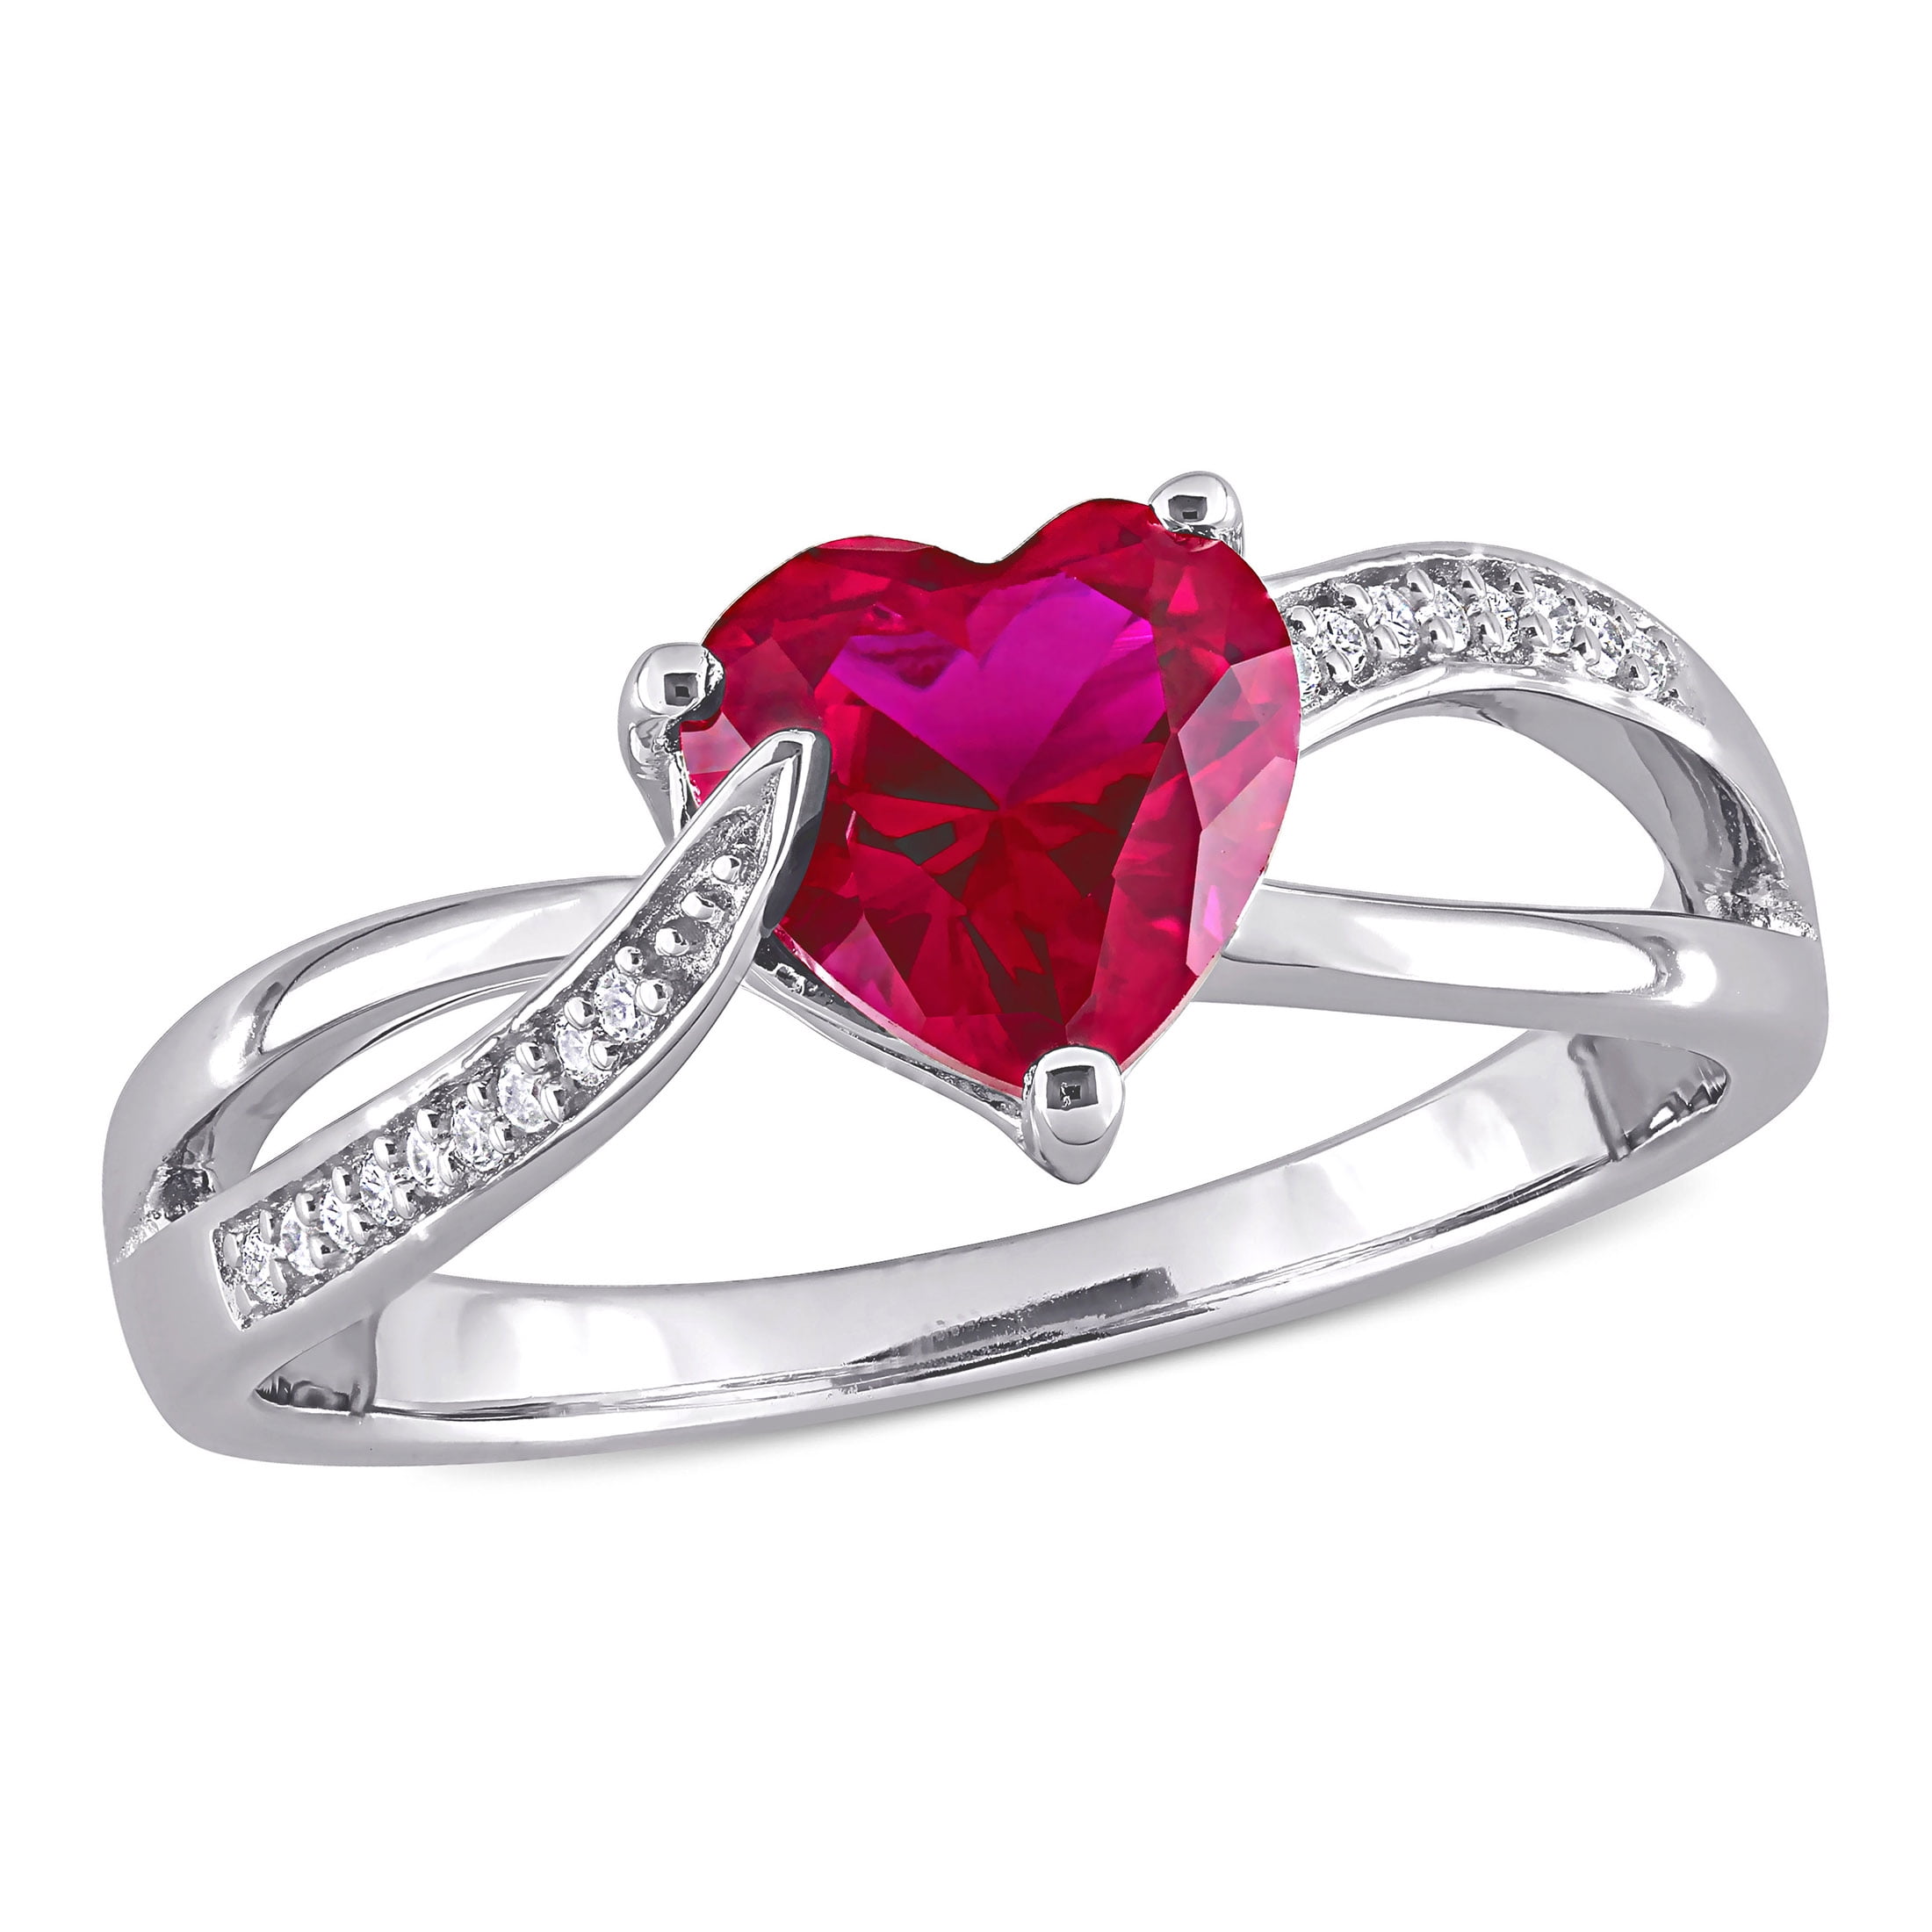 Sterling Silver 7x7 mm Princess Cut Ruby Designer Ring With Accent Stones